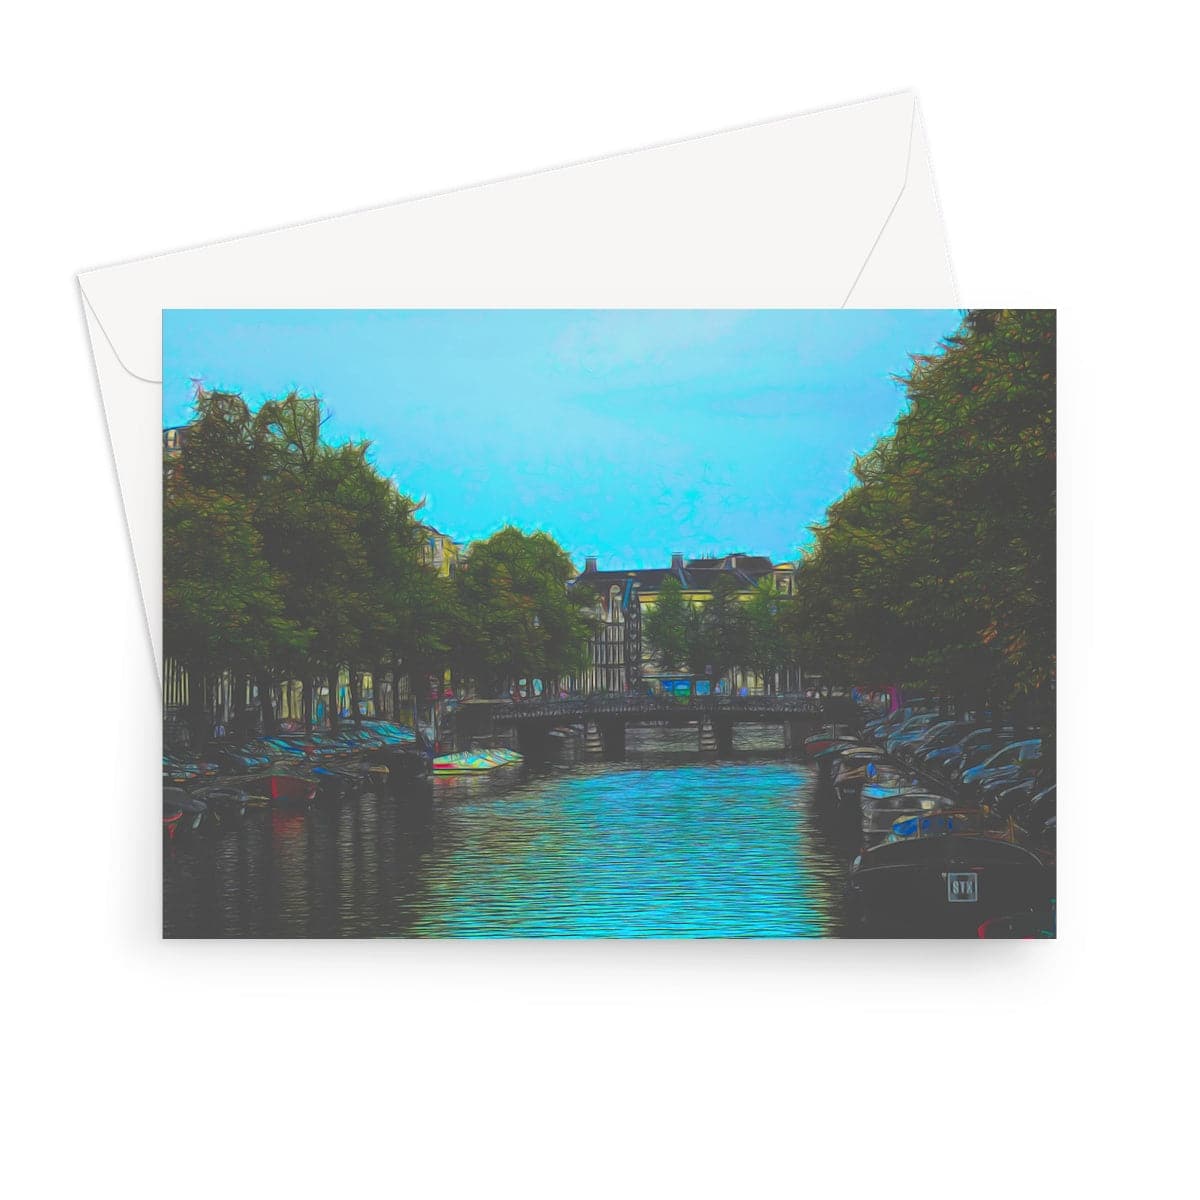 Amsterdam Canal, Art on a Greeting Card, by Sensus Studio